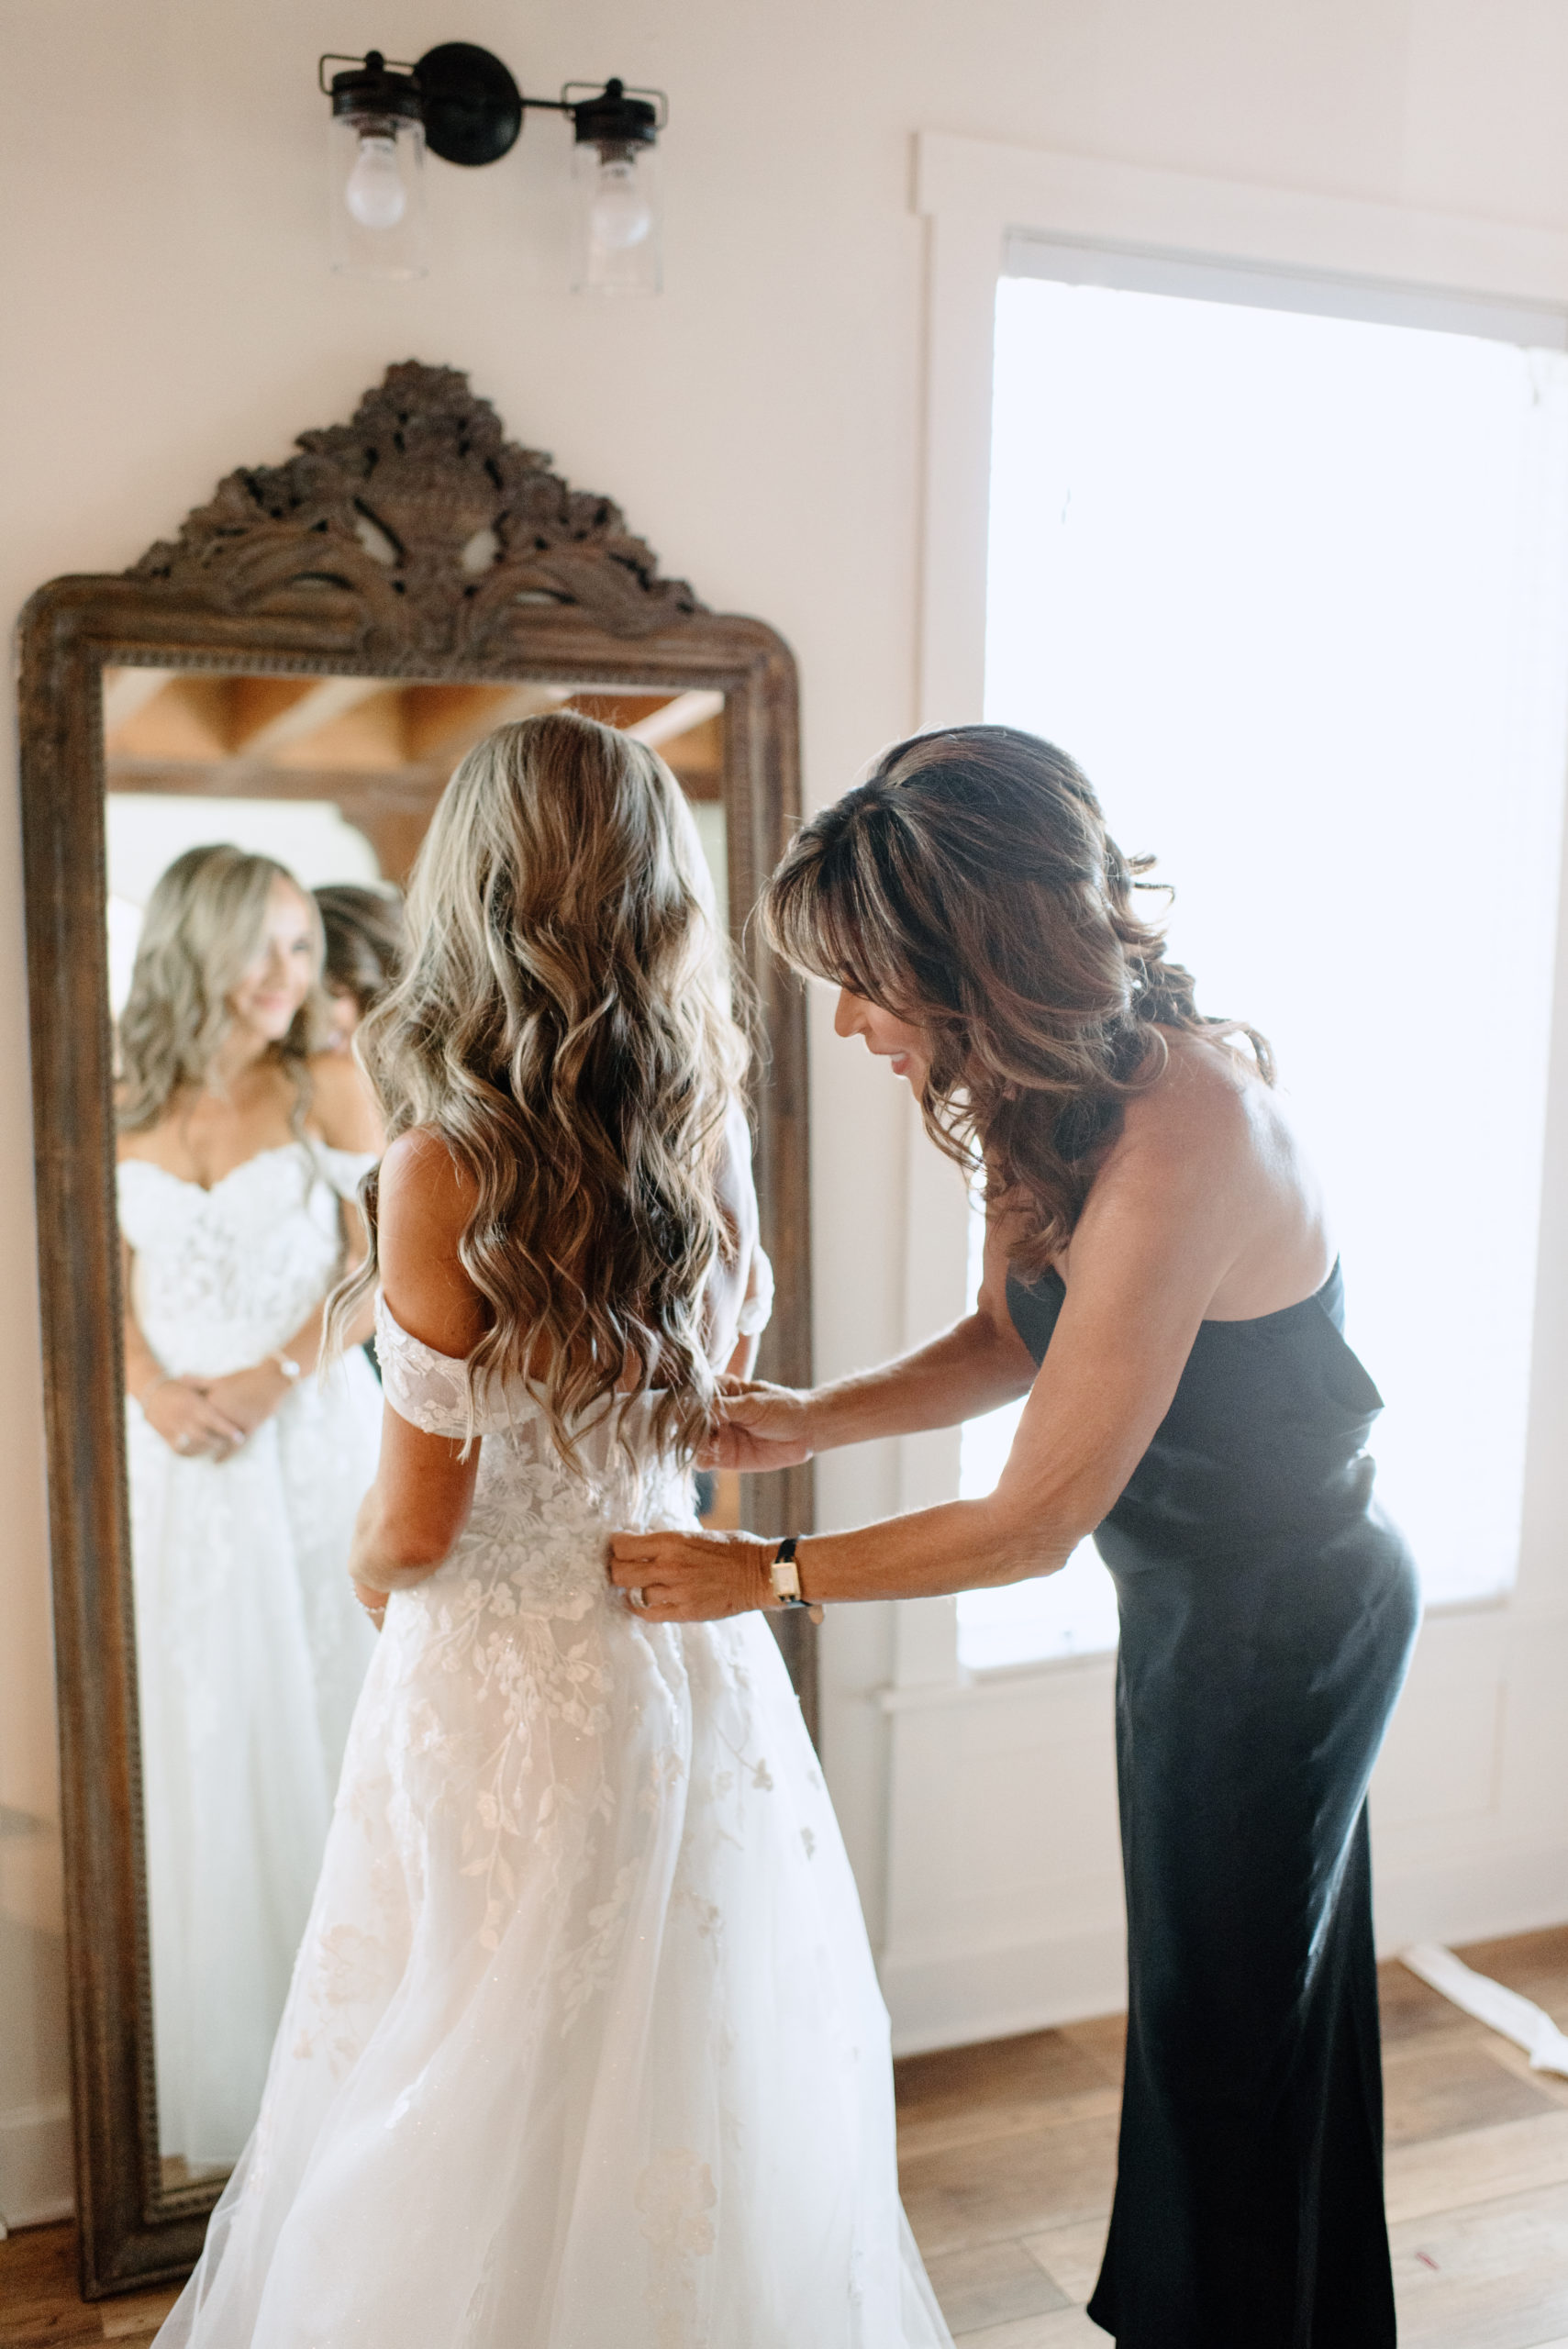 The bride's mom helping the bride get ready in the bridal suite at the Lake Arrowhead wedding venue